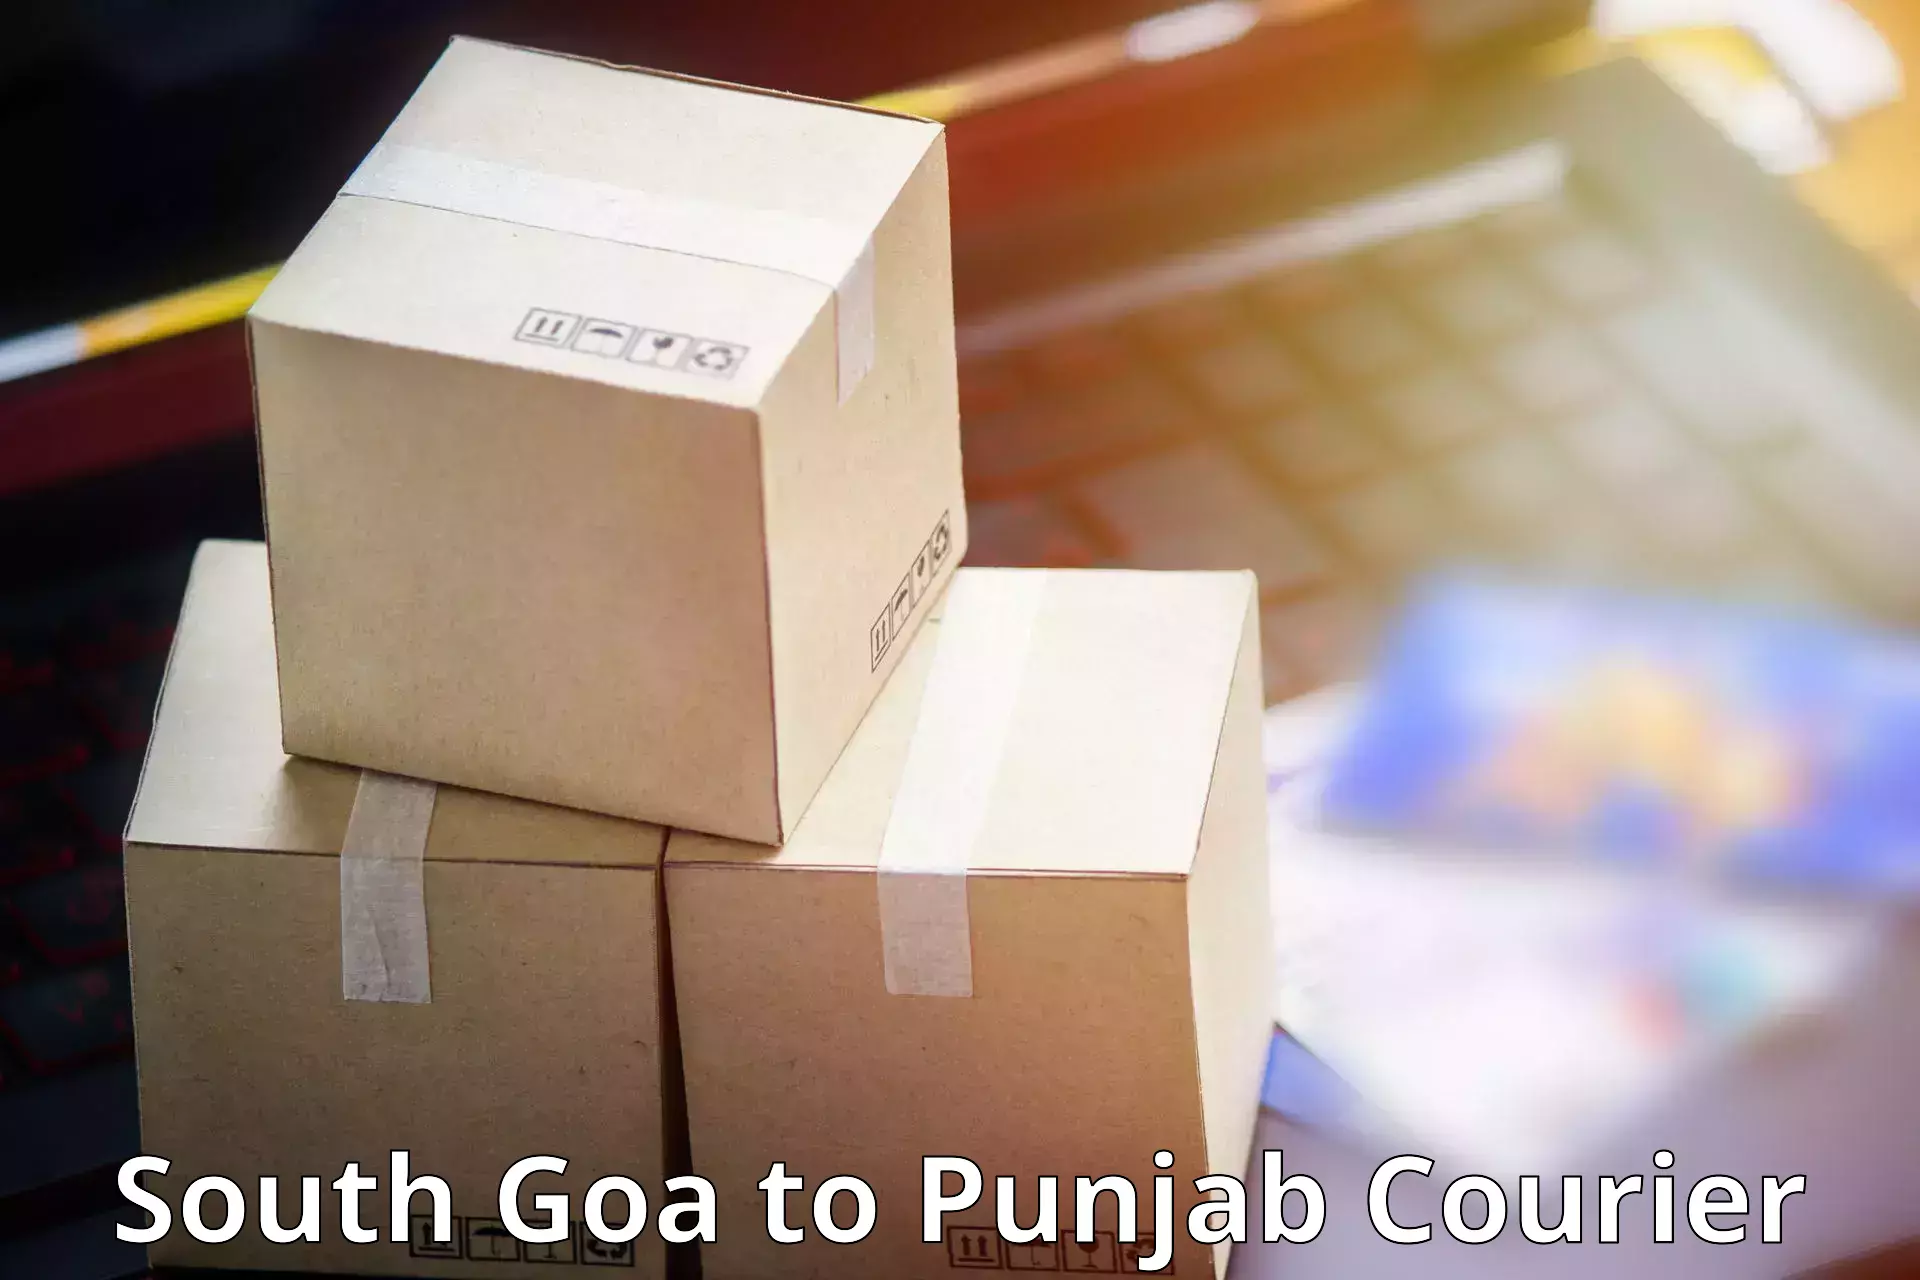 Personal courier services South Goa to Punjab